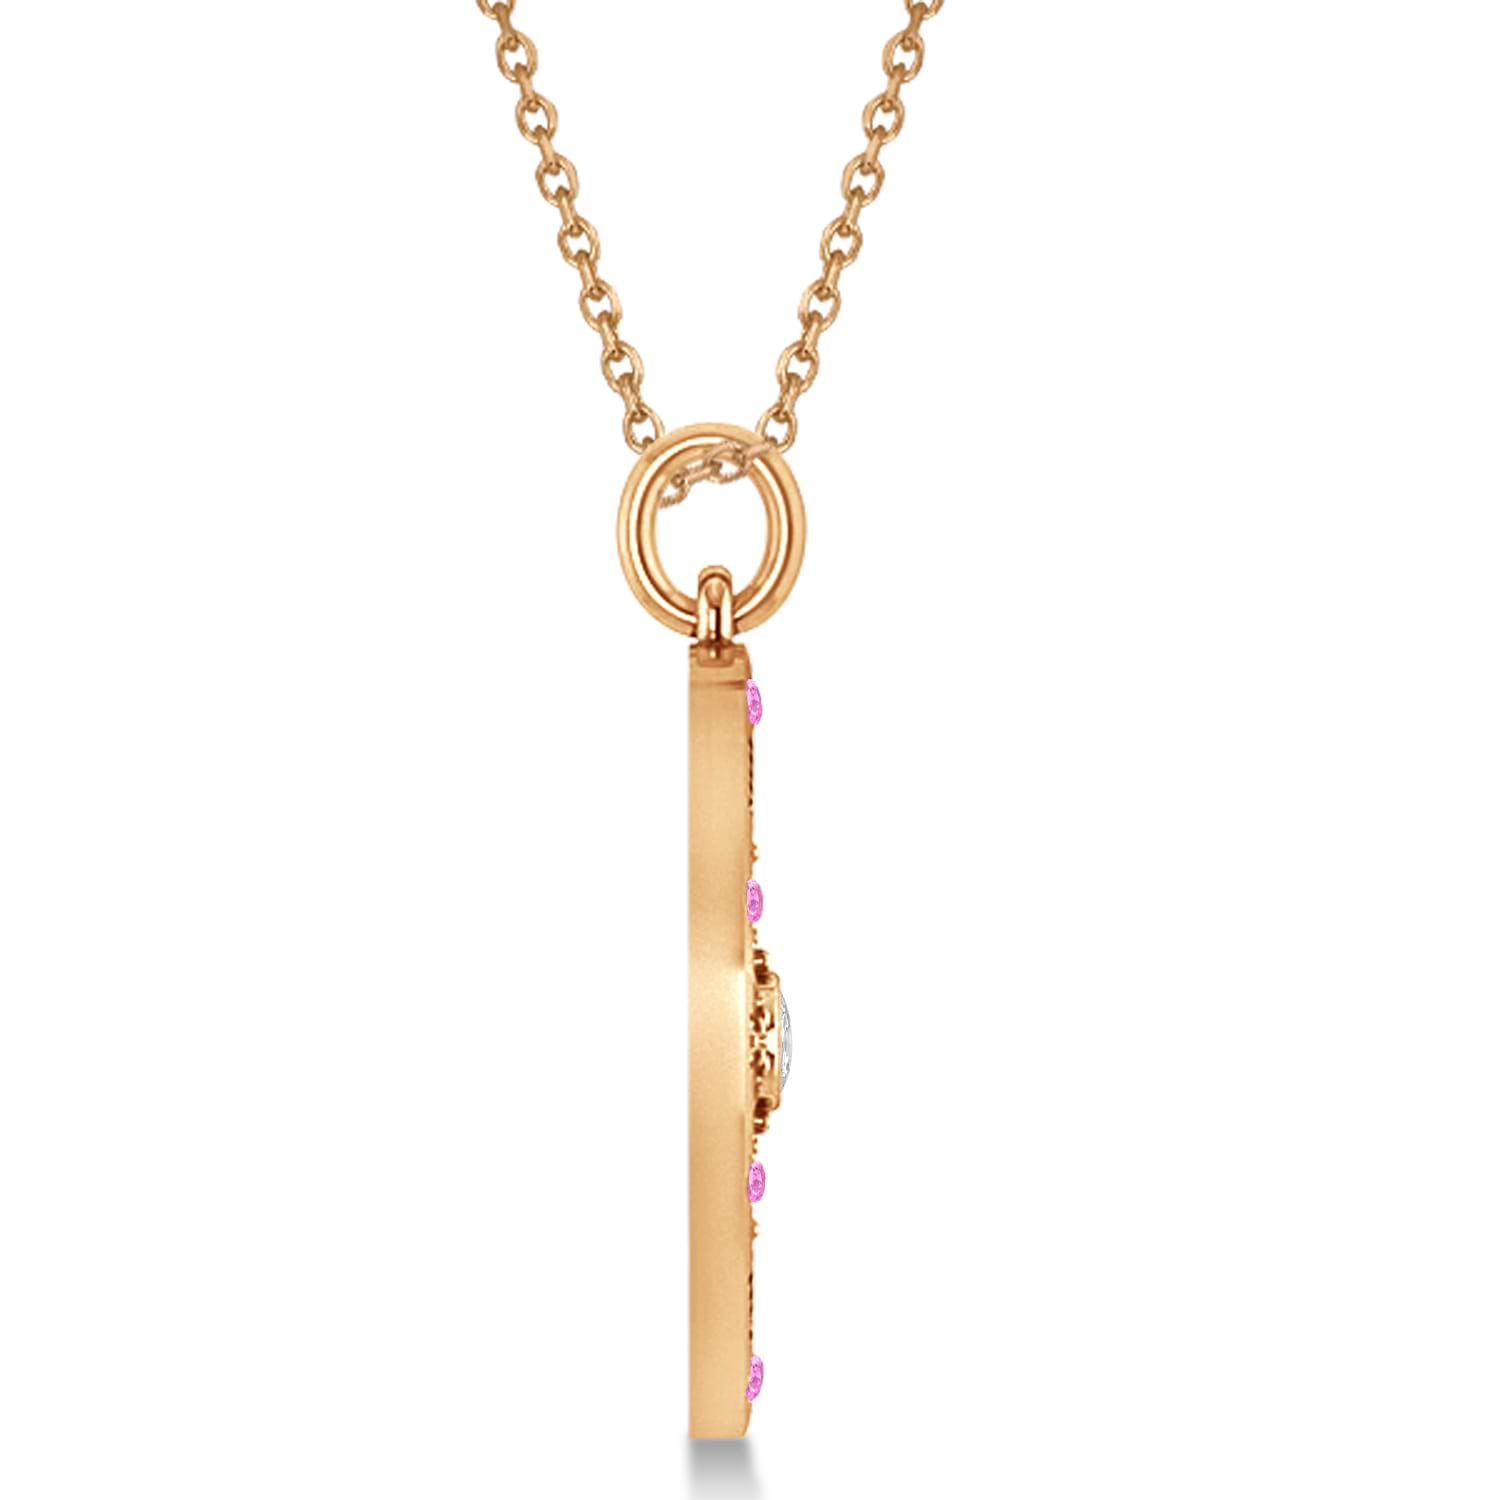 Compass Pendant Pink Sapphire & Diamond Accented 18k Rose Gold (0.19ct)